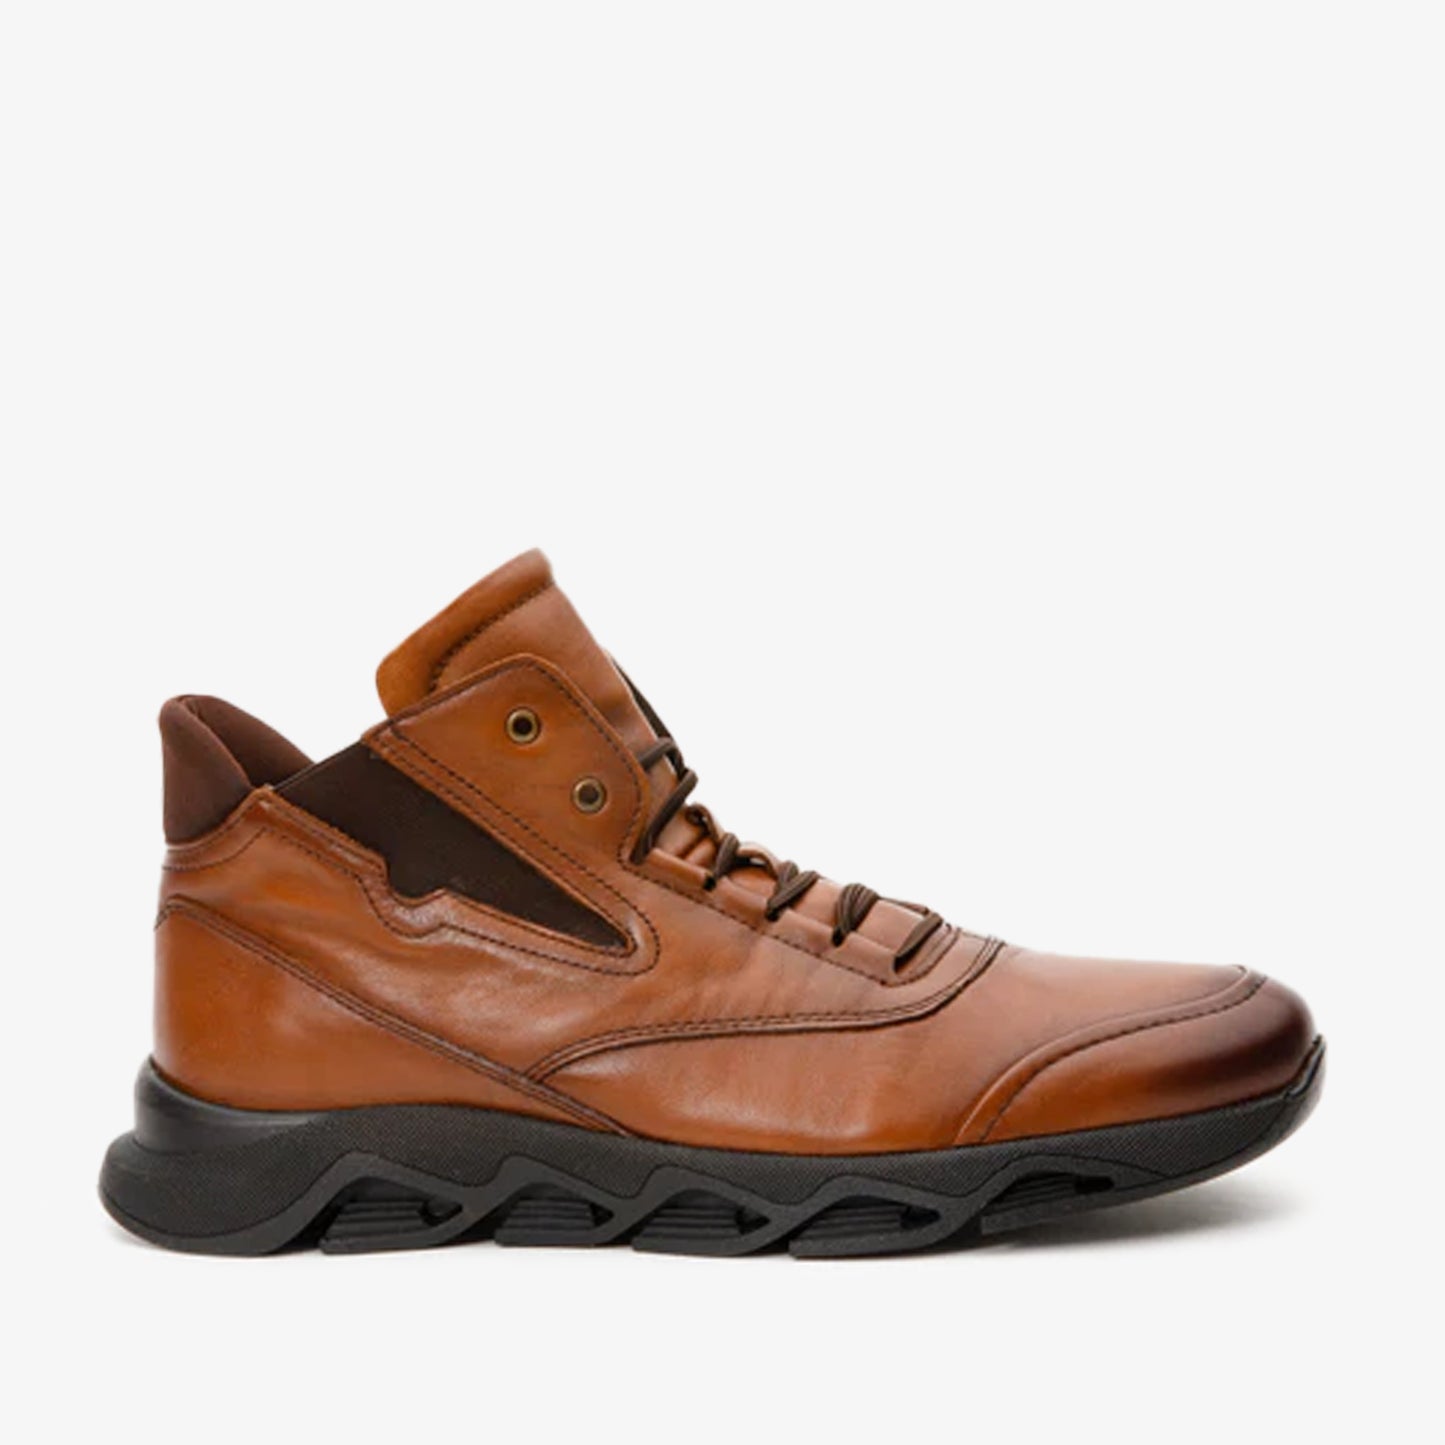 The Montana Tan Leather Casual Men Boot